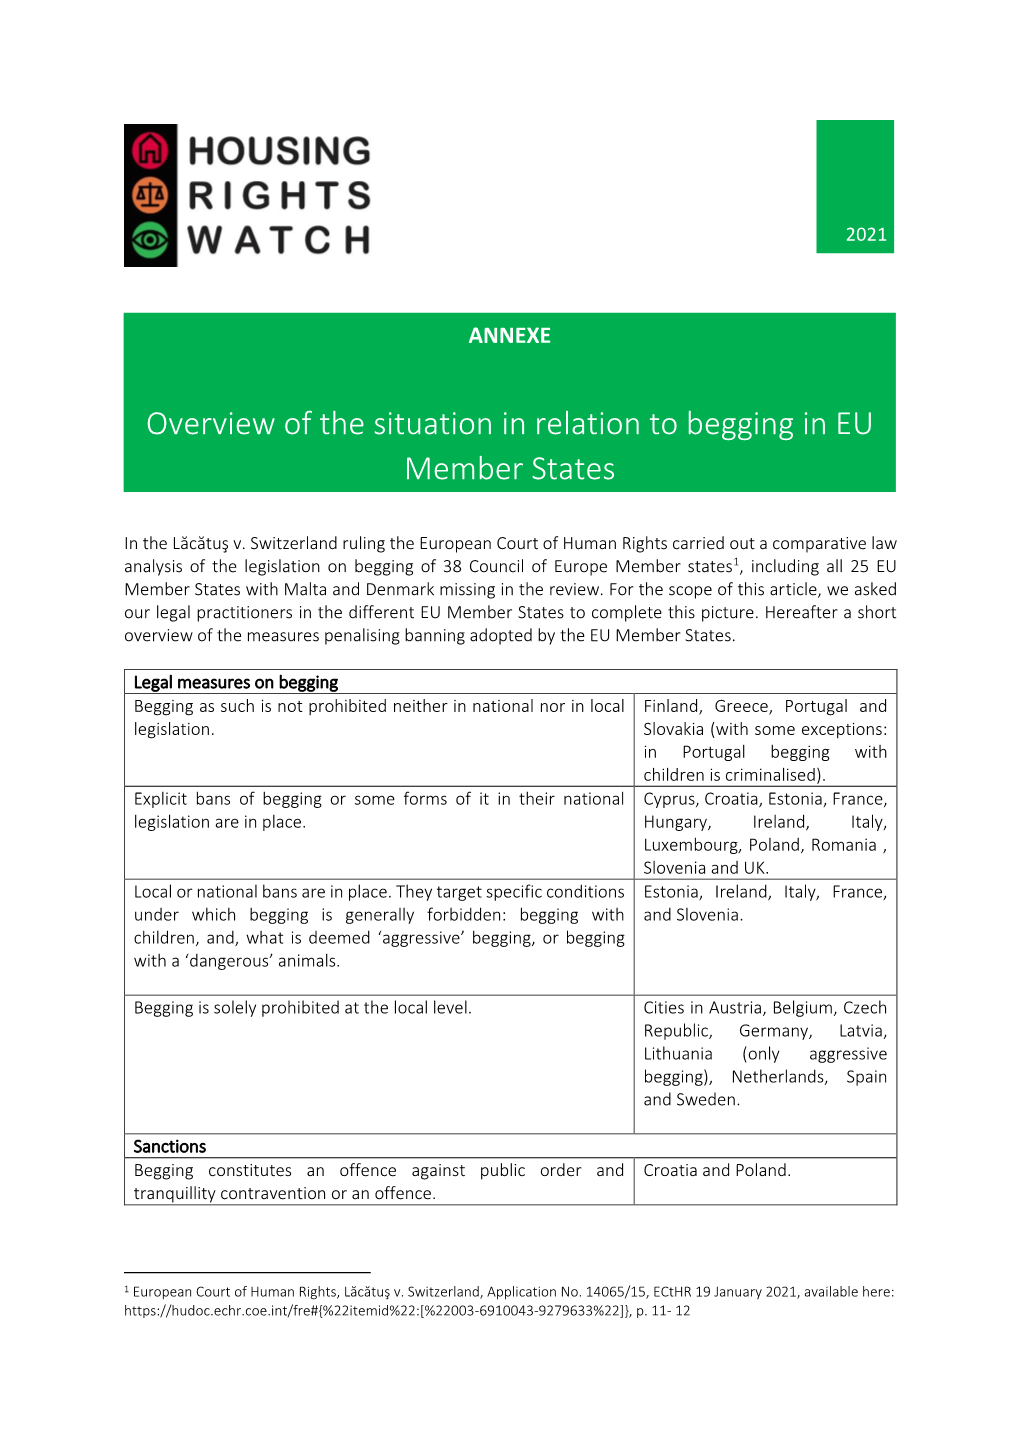 Overview of the Situation in Relation to Begging in EU Member States